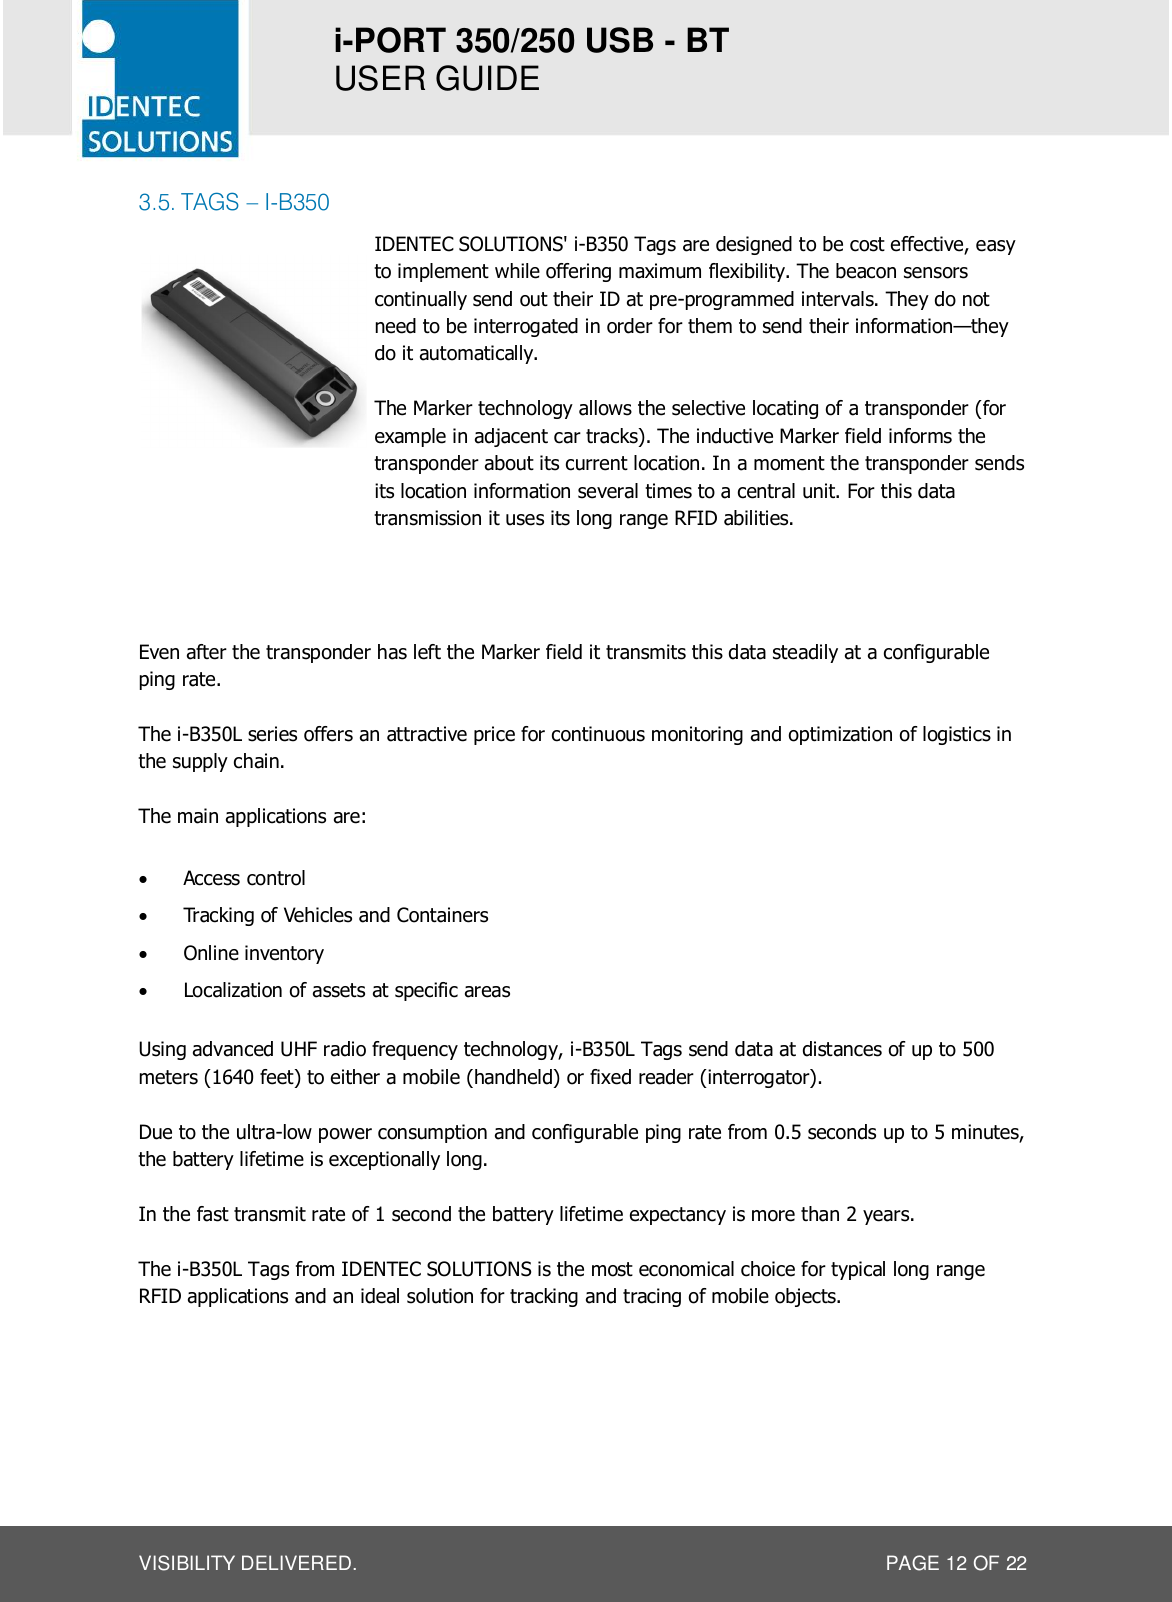 i-PORT 350/250 USB - BT  USER GUIDE  VISIBILITY DELIVERED.  PAGE 12 OF 22 3.5. TAGS – I-B350   IDENTEC SOLUTIONS&apos; i-B350 Tags are designed to be cost effective, easy to implement while offering maximum flexibility. The beacon sensors continually send out their ID at pre-programmed intervals. They do not need to be interrogated in order for them to send their information—they do it automatically.  The Marker technology allows the selective locating of a transponder (for example in adjacent car tracks). The inductive Marker field informs the transponder about its current location. In a moment the transponder sends its location information several times to a central unit. For this data transmission it uses its long range RFID abilities.  FEATURES VISIBILITY DELIVERED. Even after the transponder has left the Marker field it transmits this data steadily at a configurable ping rate.  The i-B350L series offers an attractive price for continuous monitoring and optimization of logistics in the supply chain.  The main applications are:  · Access control · Tracking of Vehicles and Containers · Online inventory · Localization of assets at specific areas    Using advanced UHF radio frequency technology, i-B350L Tags send data at distances of up to 500 meters (1640 feet) to either a mobile (handheld) or fixed reader (interrogator).  Due to the ultra-low power consumption and configurable ping rate from 0.5 seconds up to 5 minutes, the battery lifetime is exceptionally long.  In the fast transmit rate of 1 second the battery lifetime expectancy is more than 2 years.  The i-B350L Tags from IDENTEC SOLUTIONS is the most economical choice for typical long range RFID applications and an ideal solution for tracking and tracing of mobile objects.      